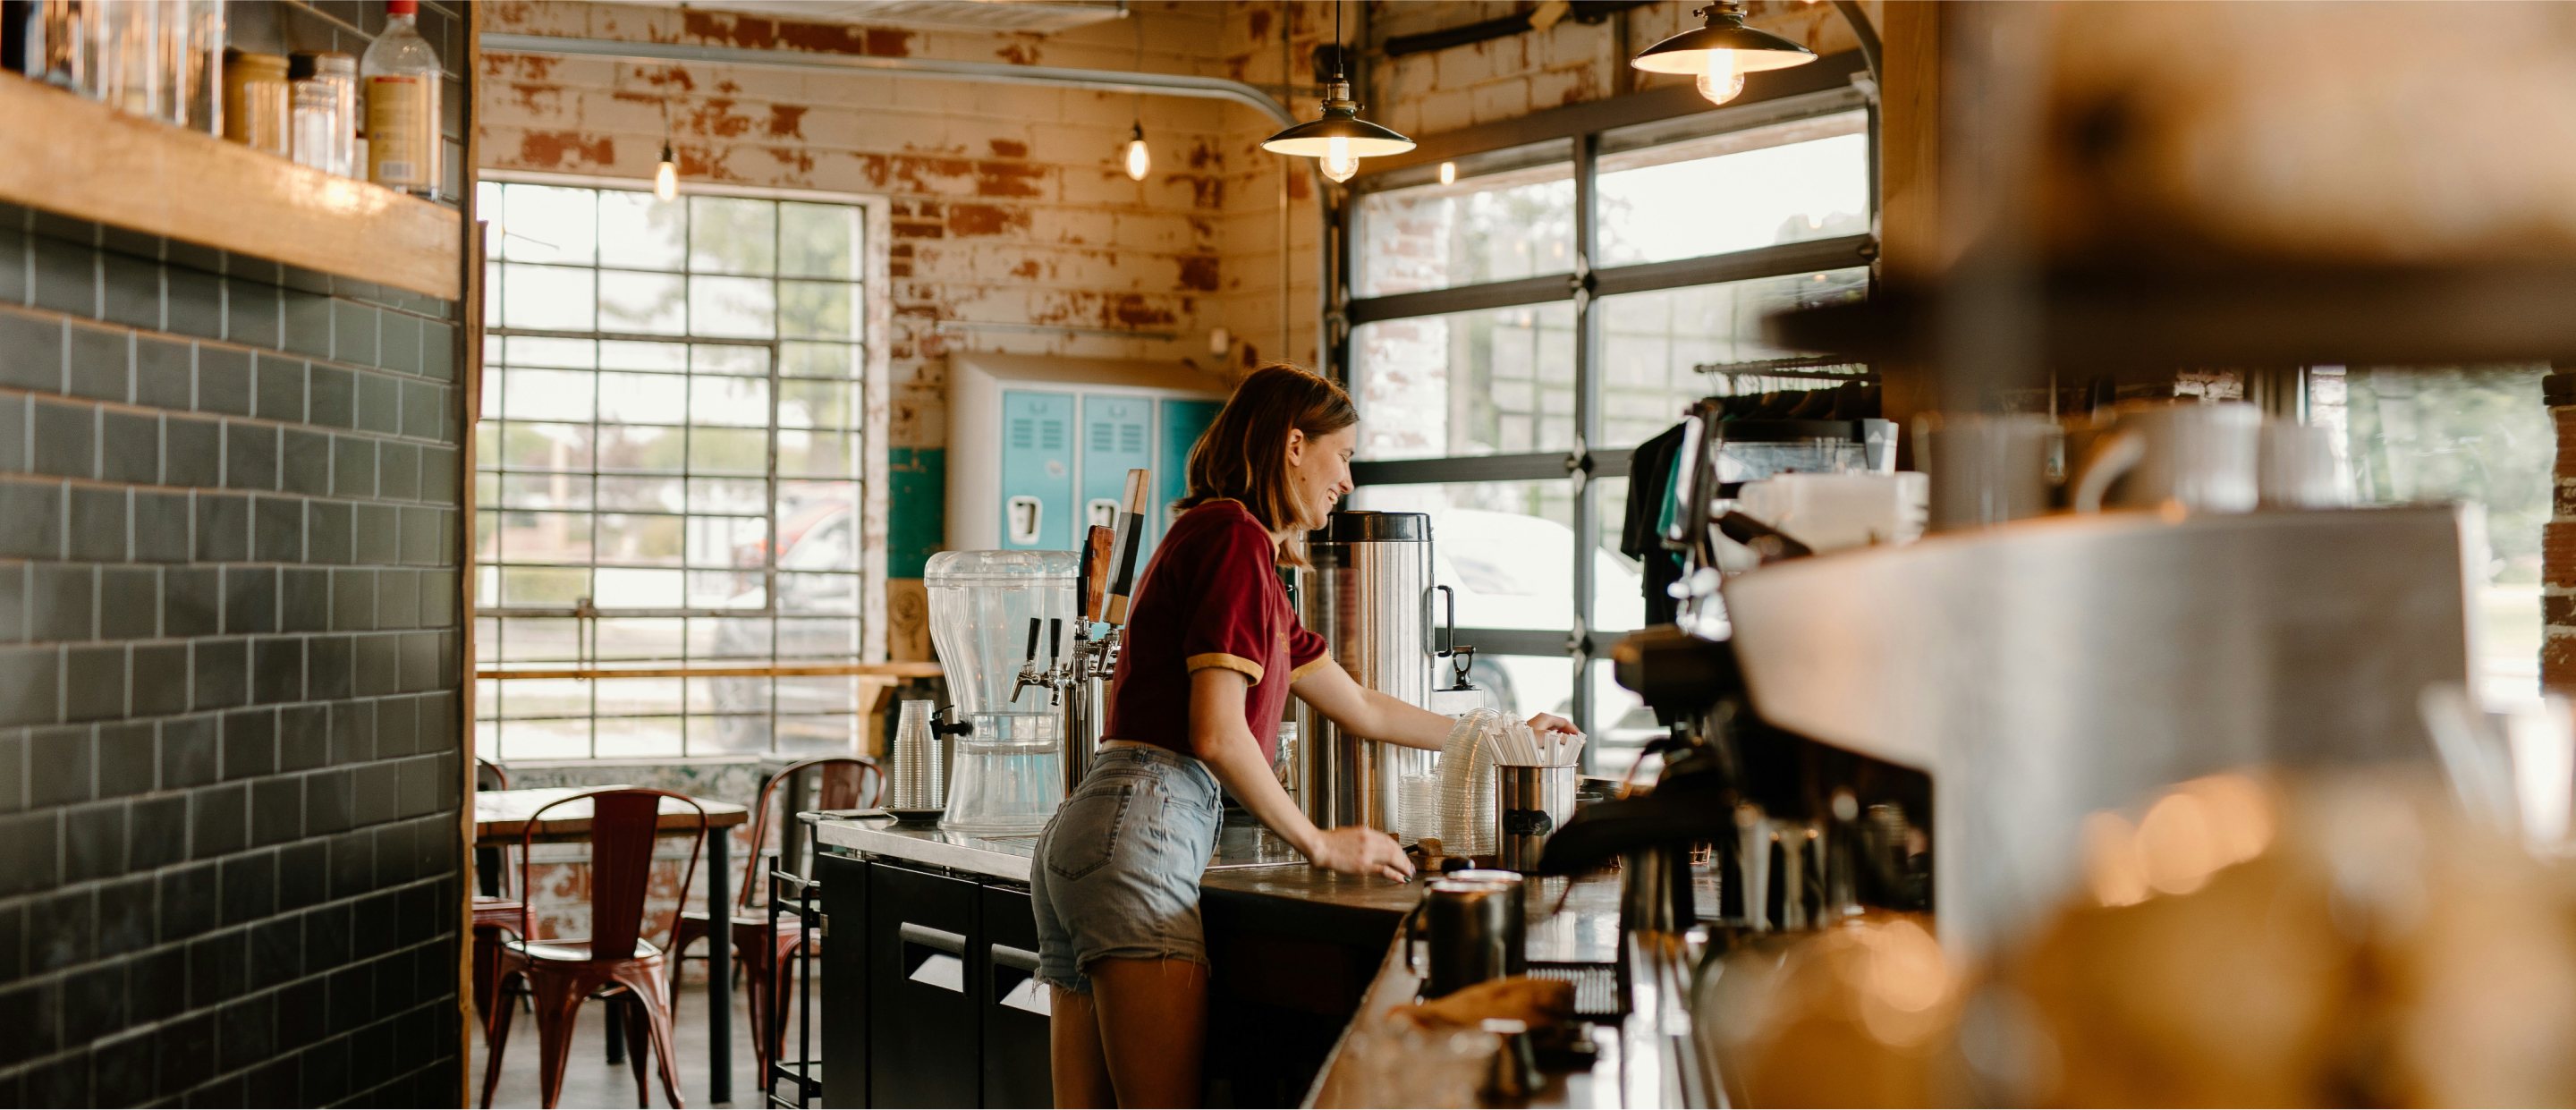 Photograph of a woman behind a coffee counter